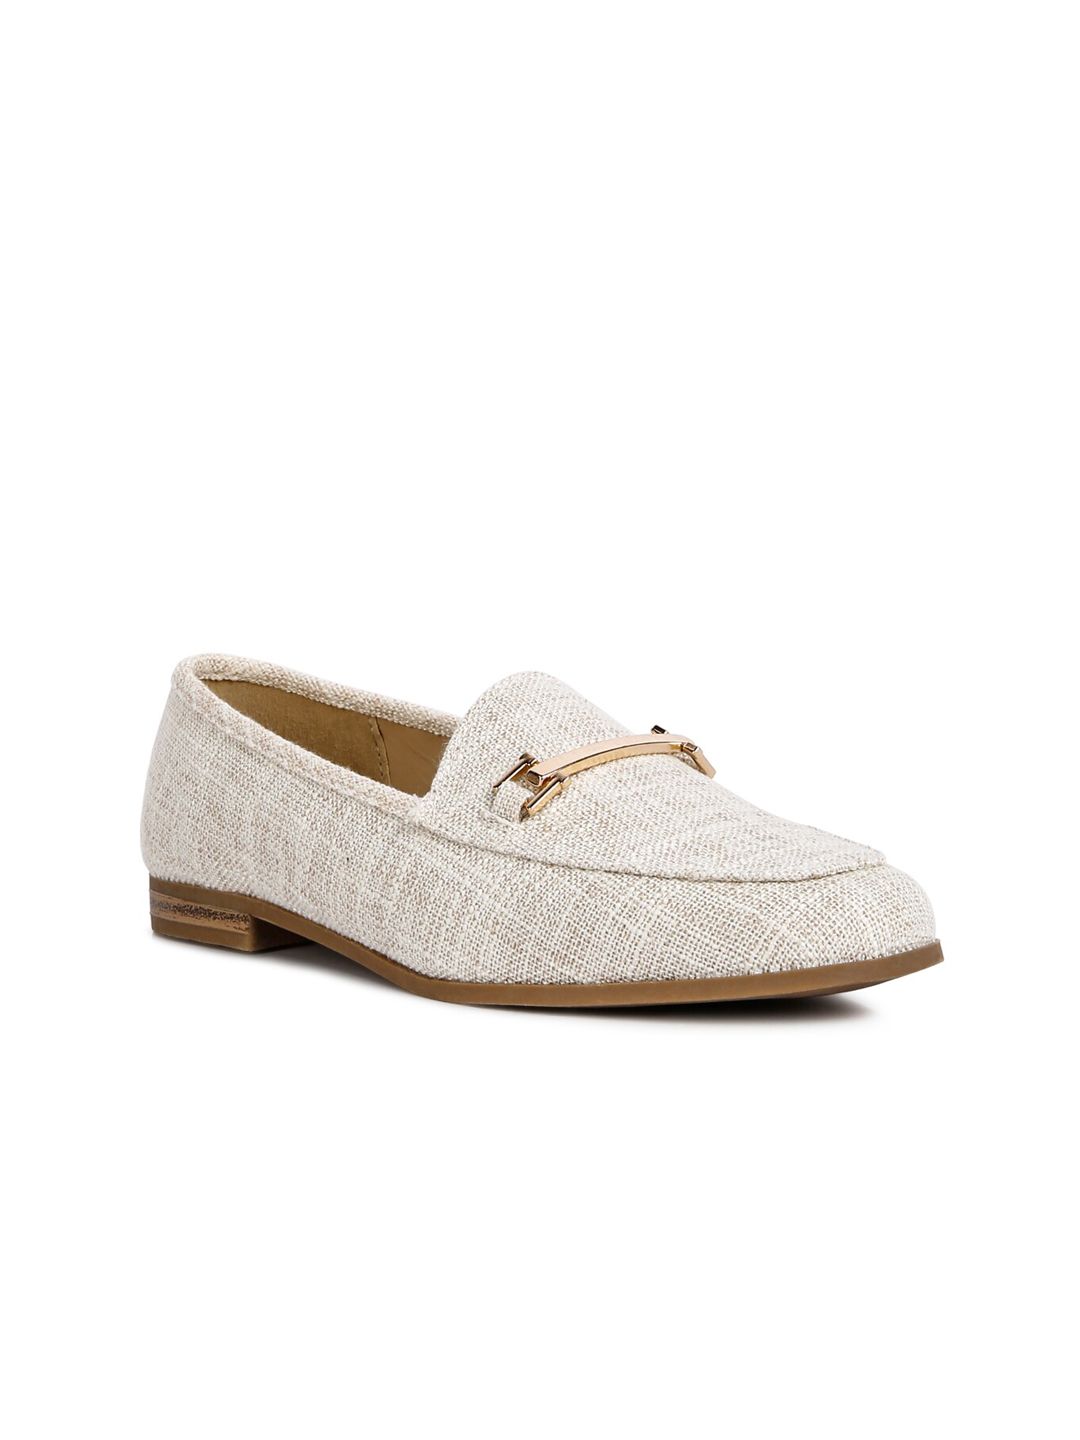 London Rag Women Beige Textured Loafers Price in India